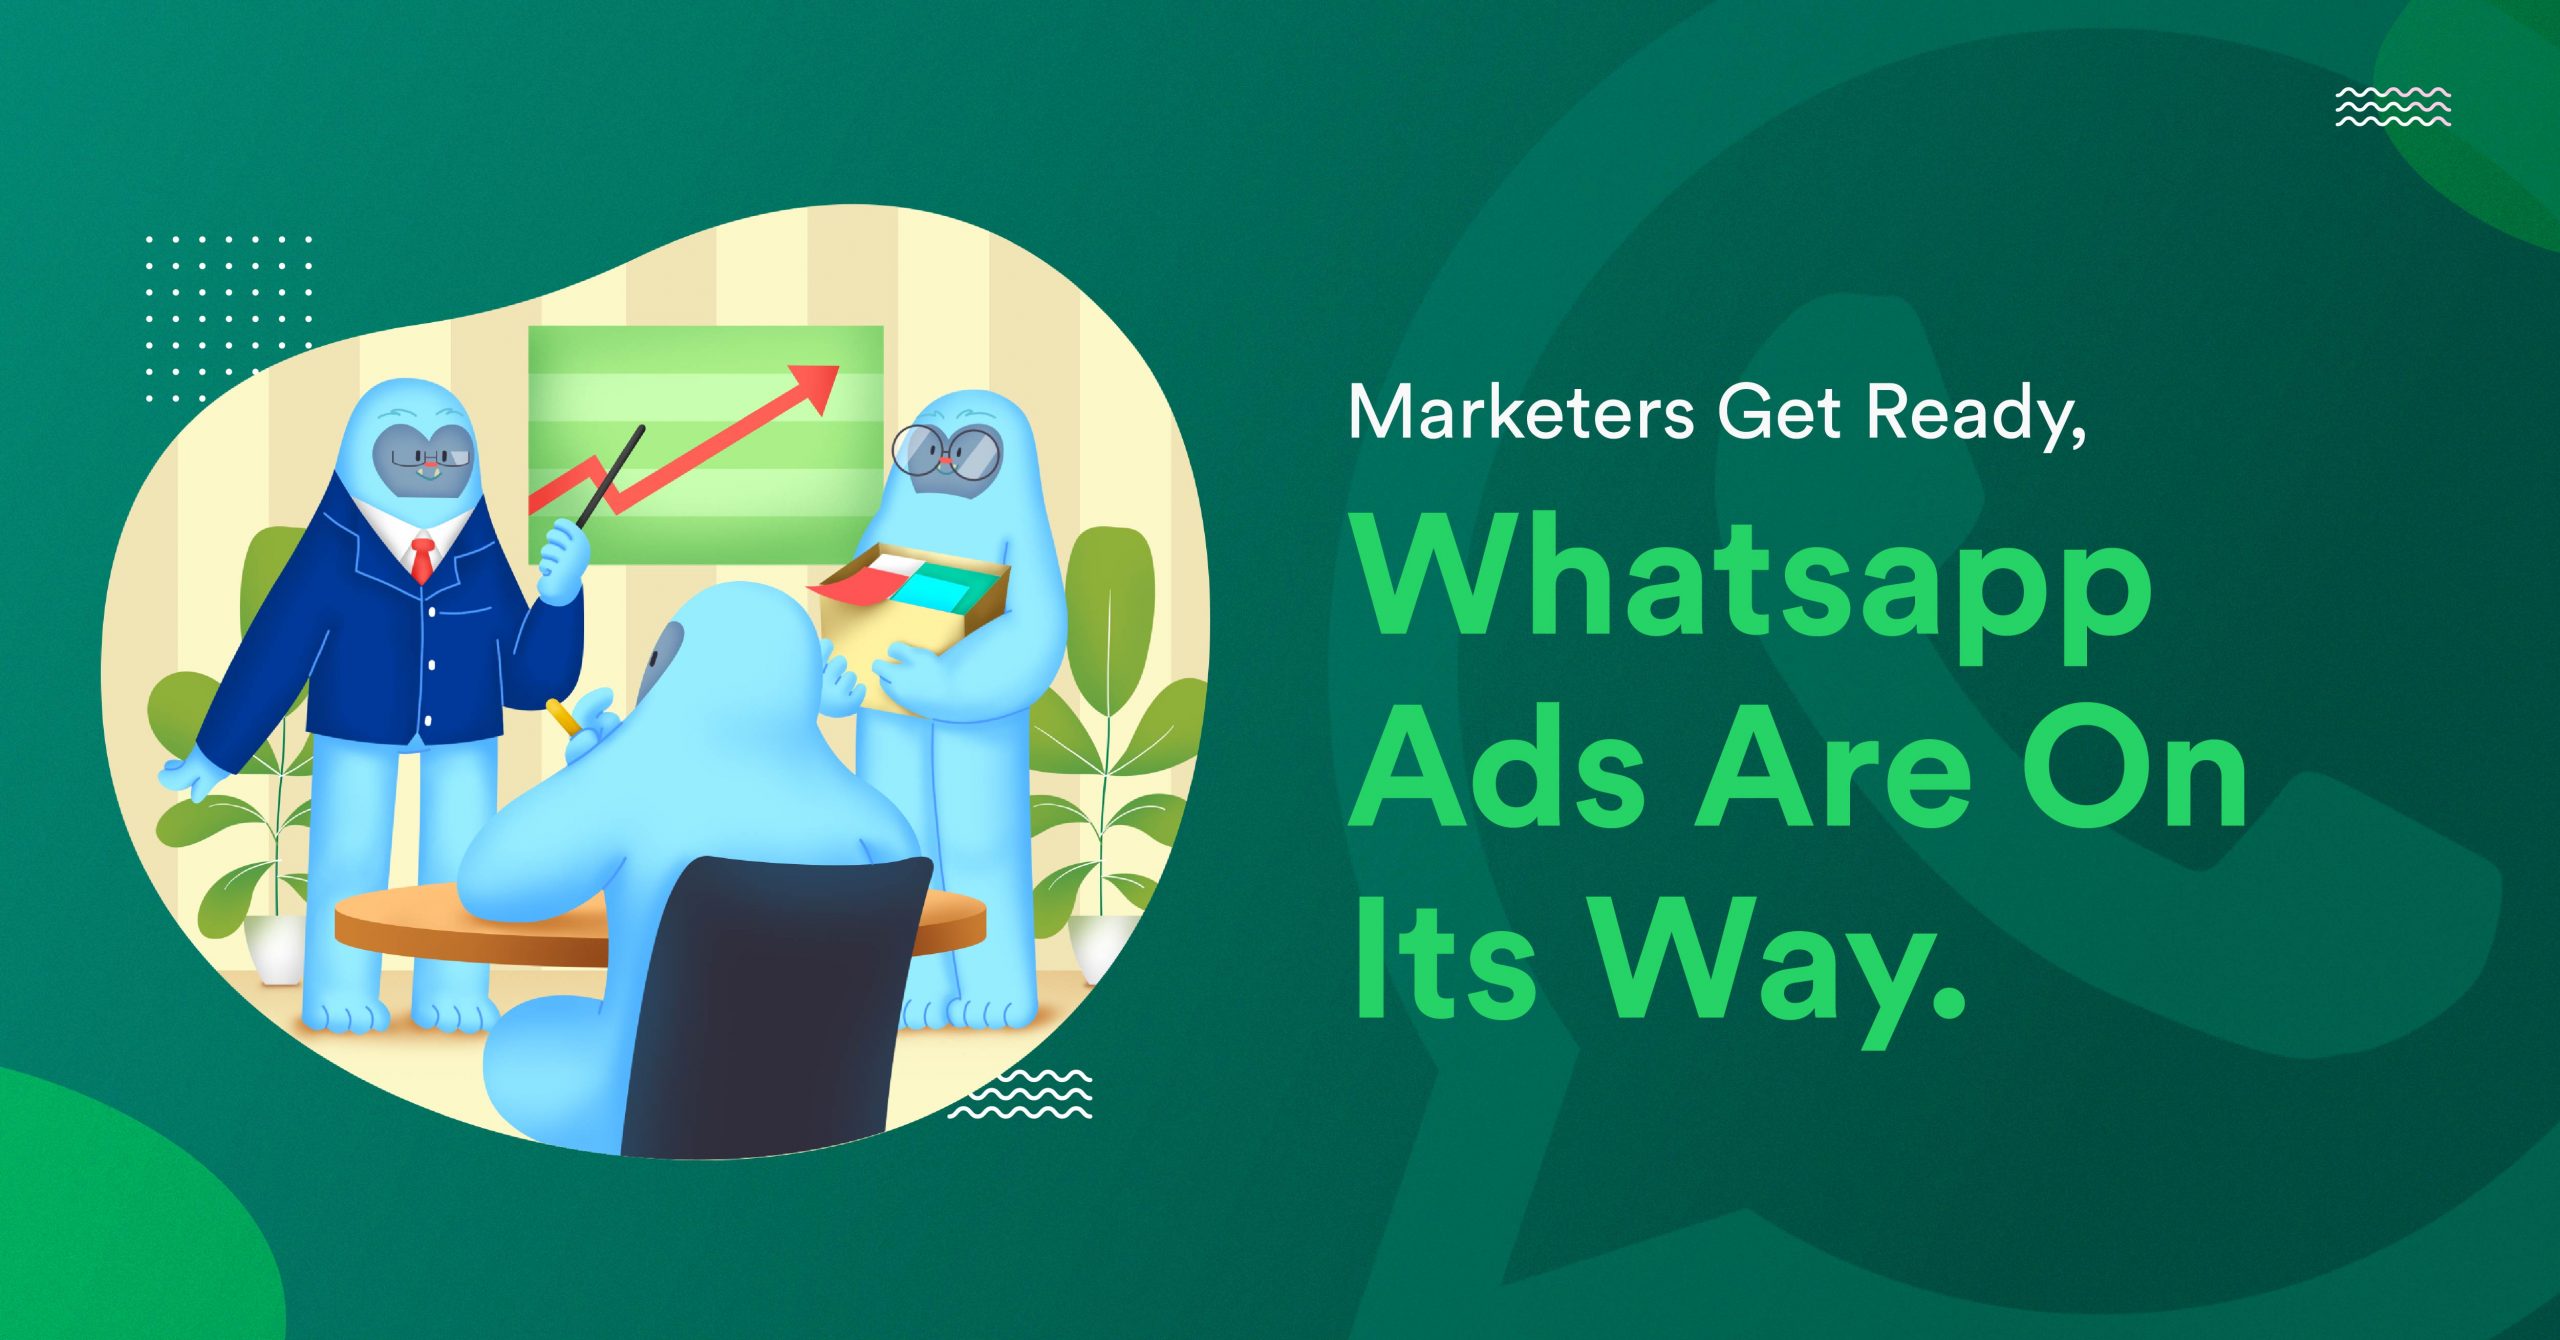 Marketers Get Ready, Whatsapp Ads Are On Its Way.